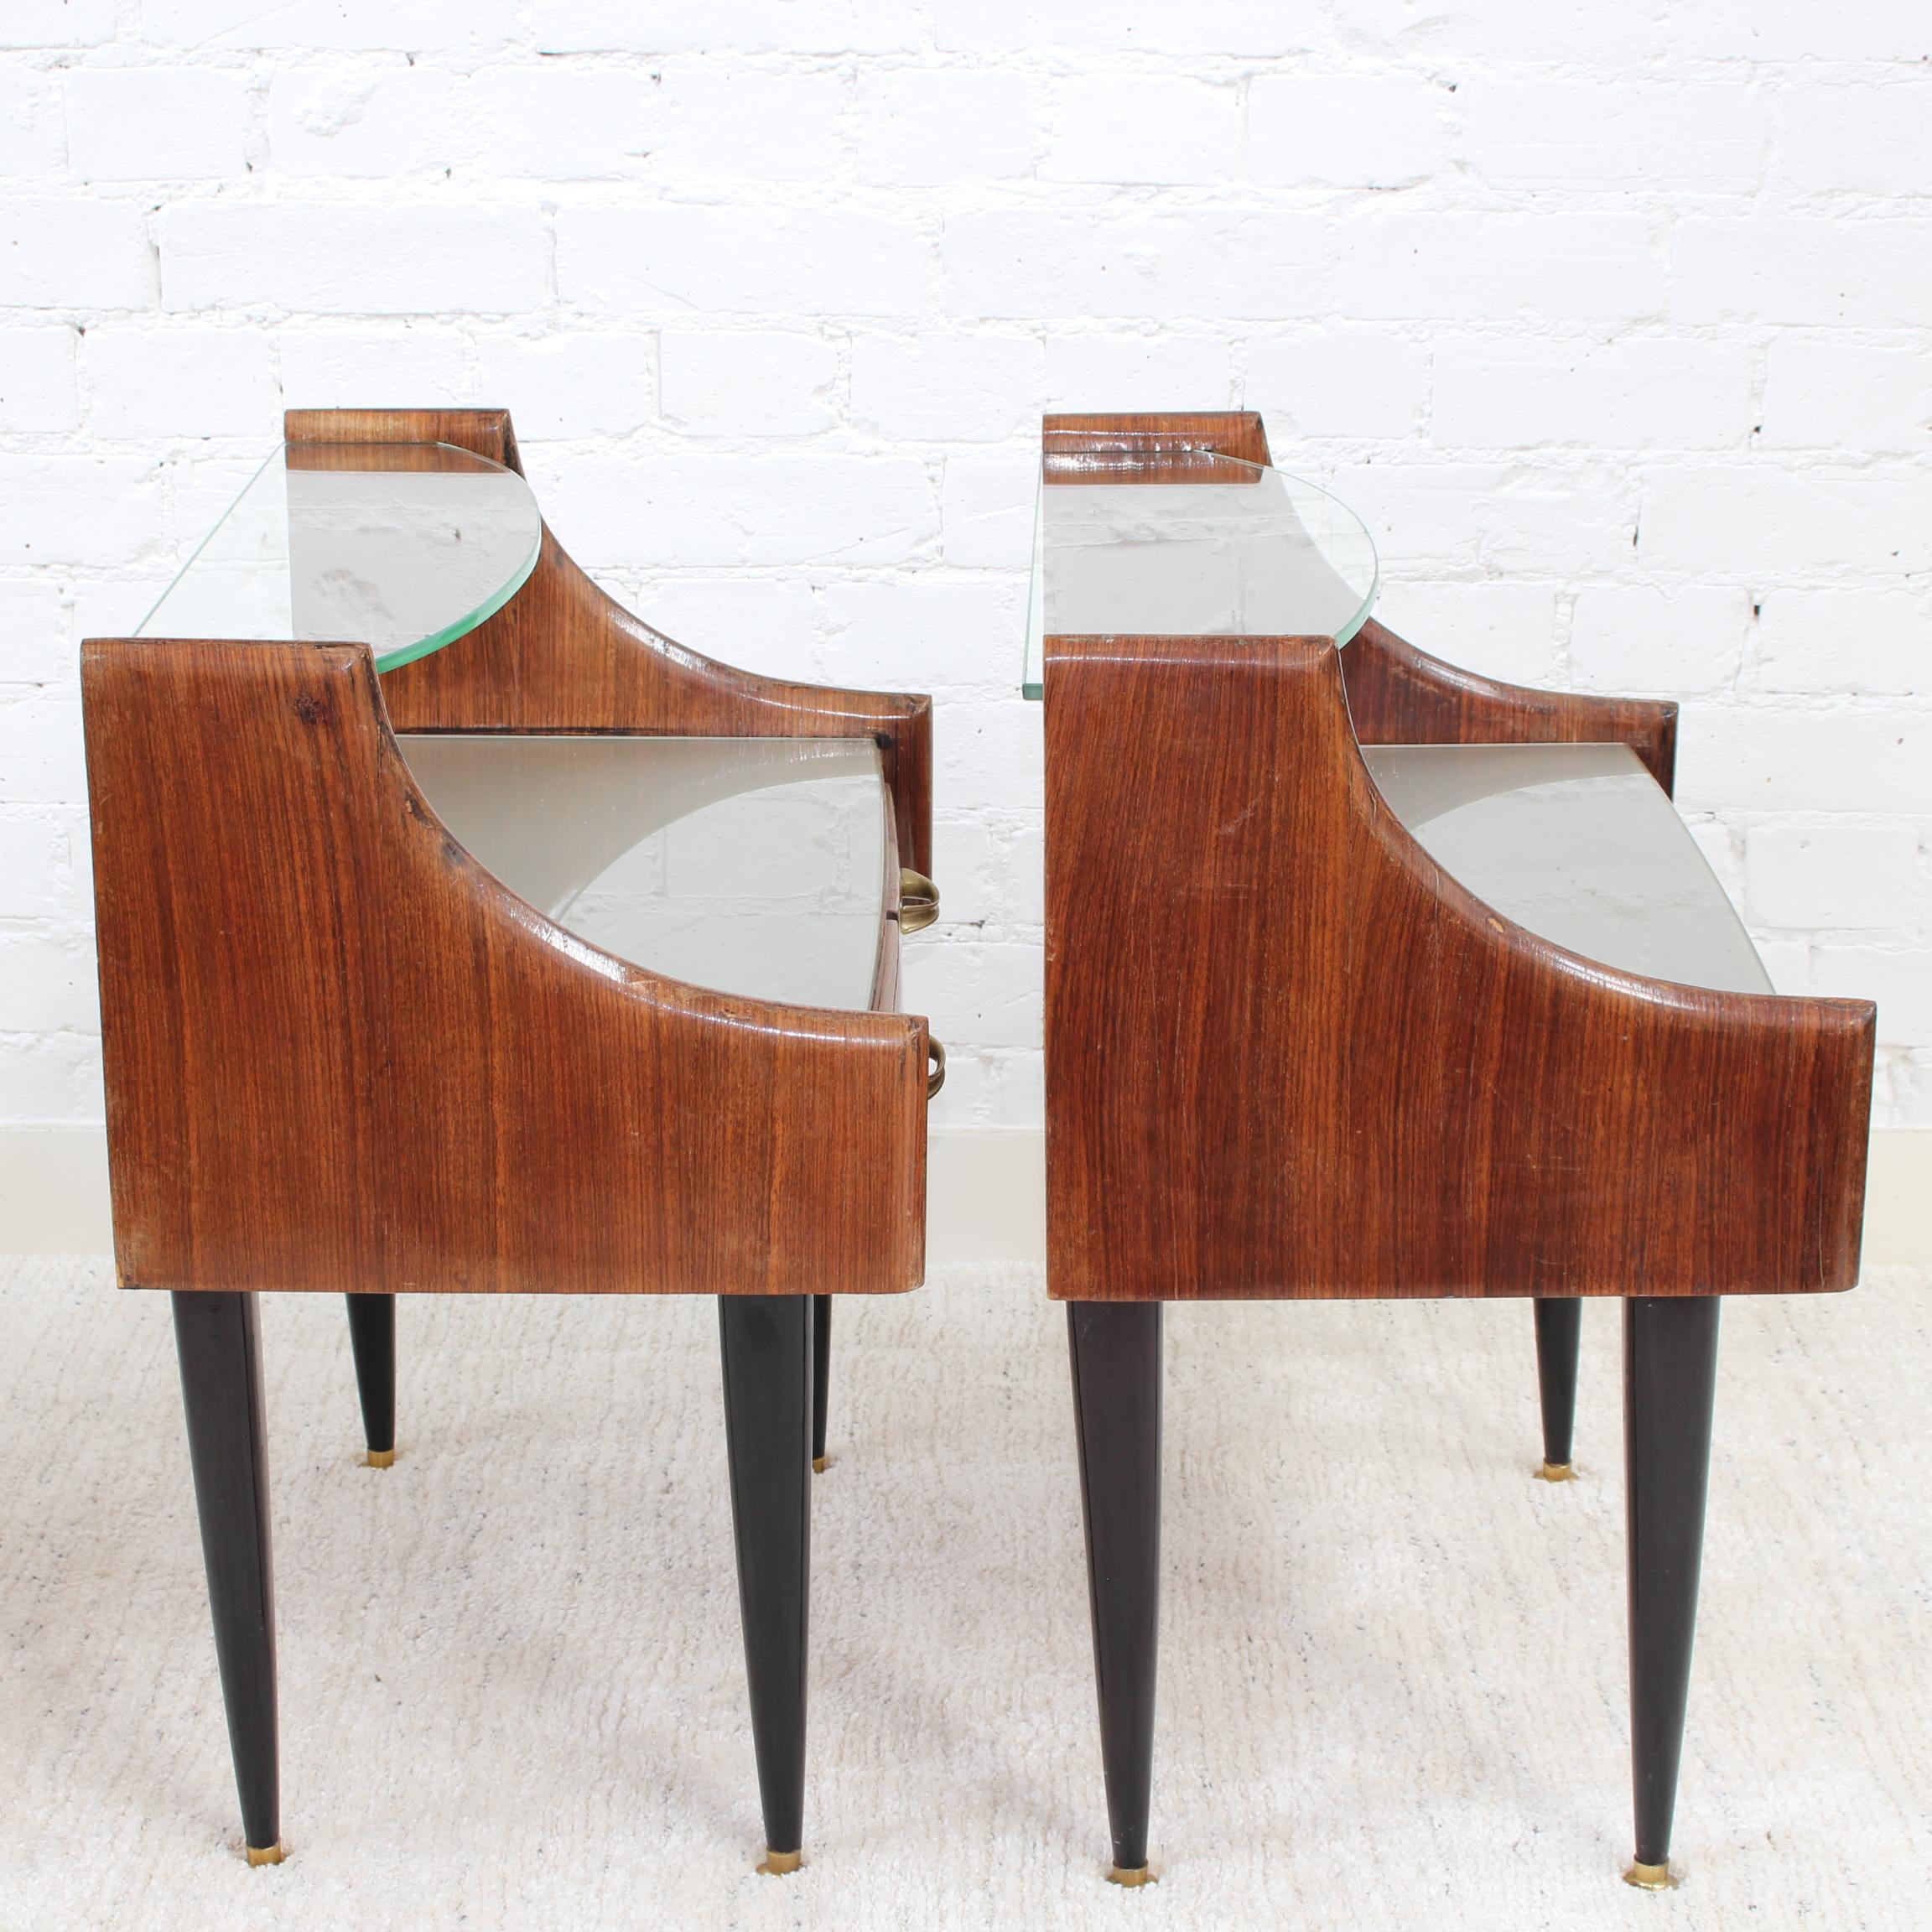 Glass Pair of Vintage Italian Bedside Tables / Night Stands (circa 1950s)